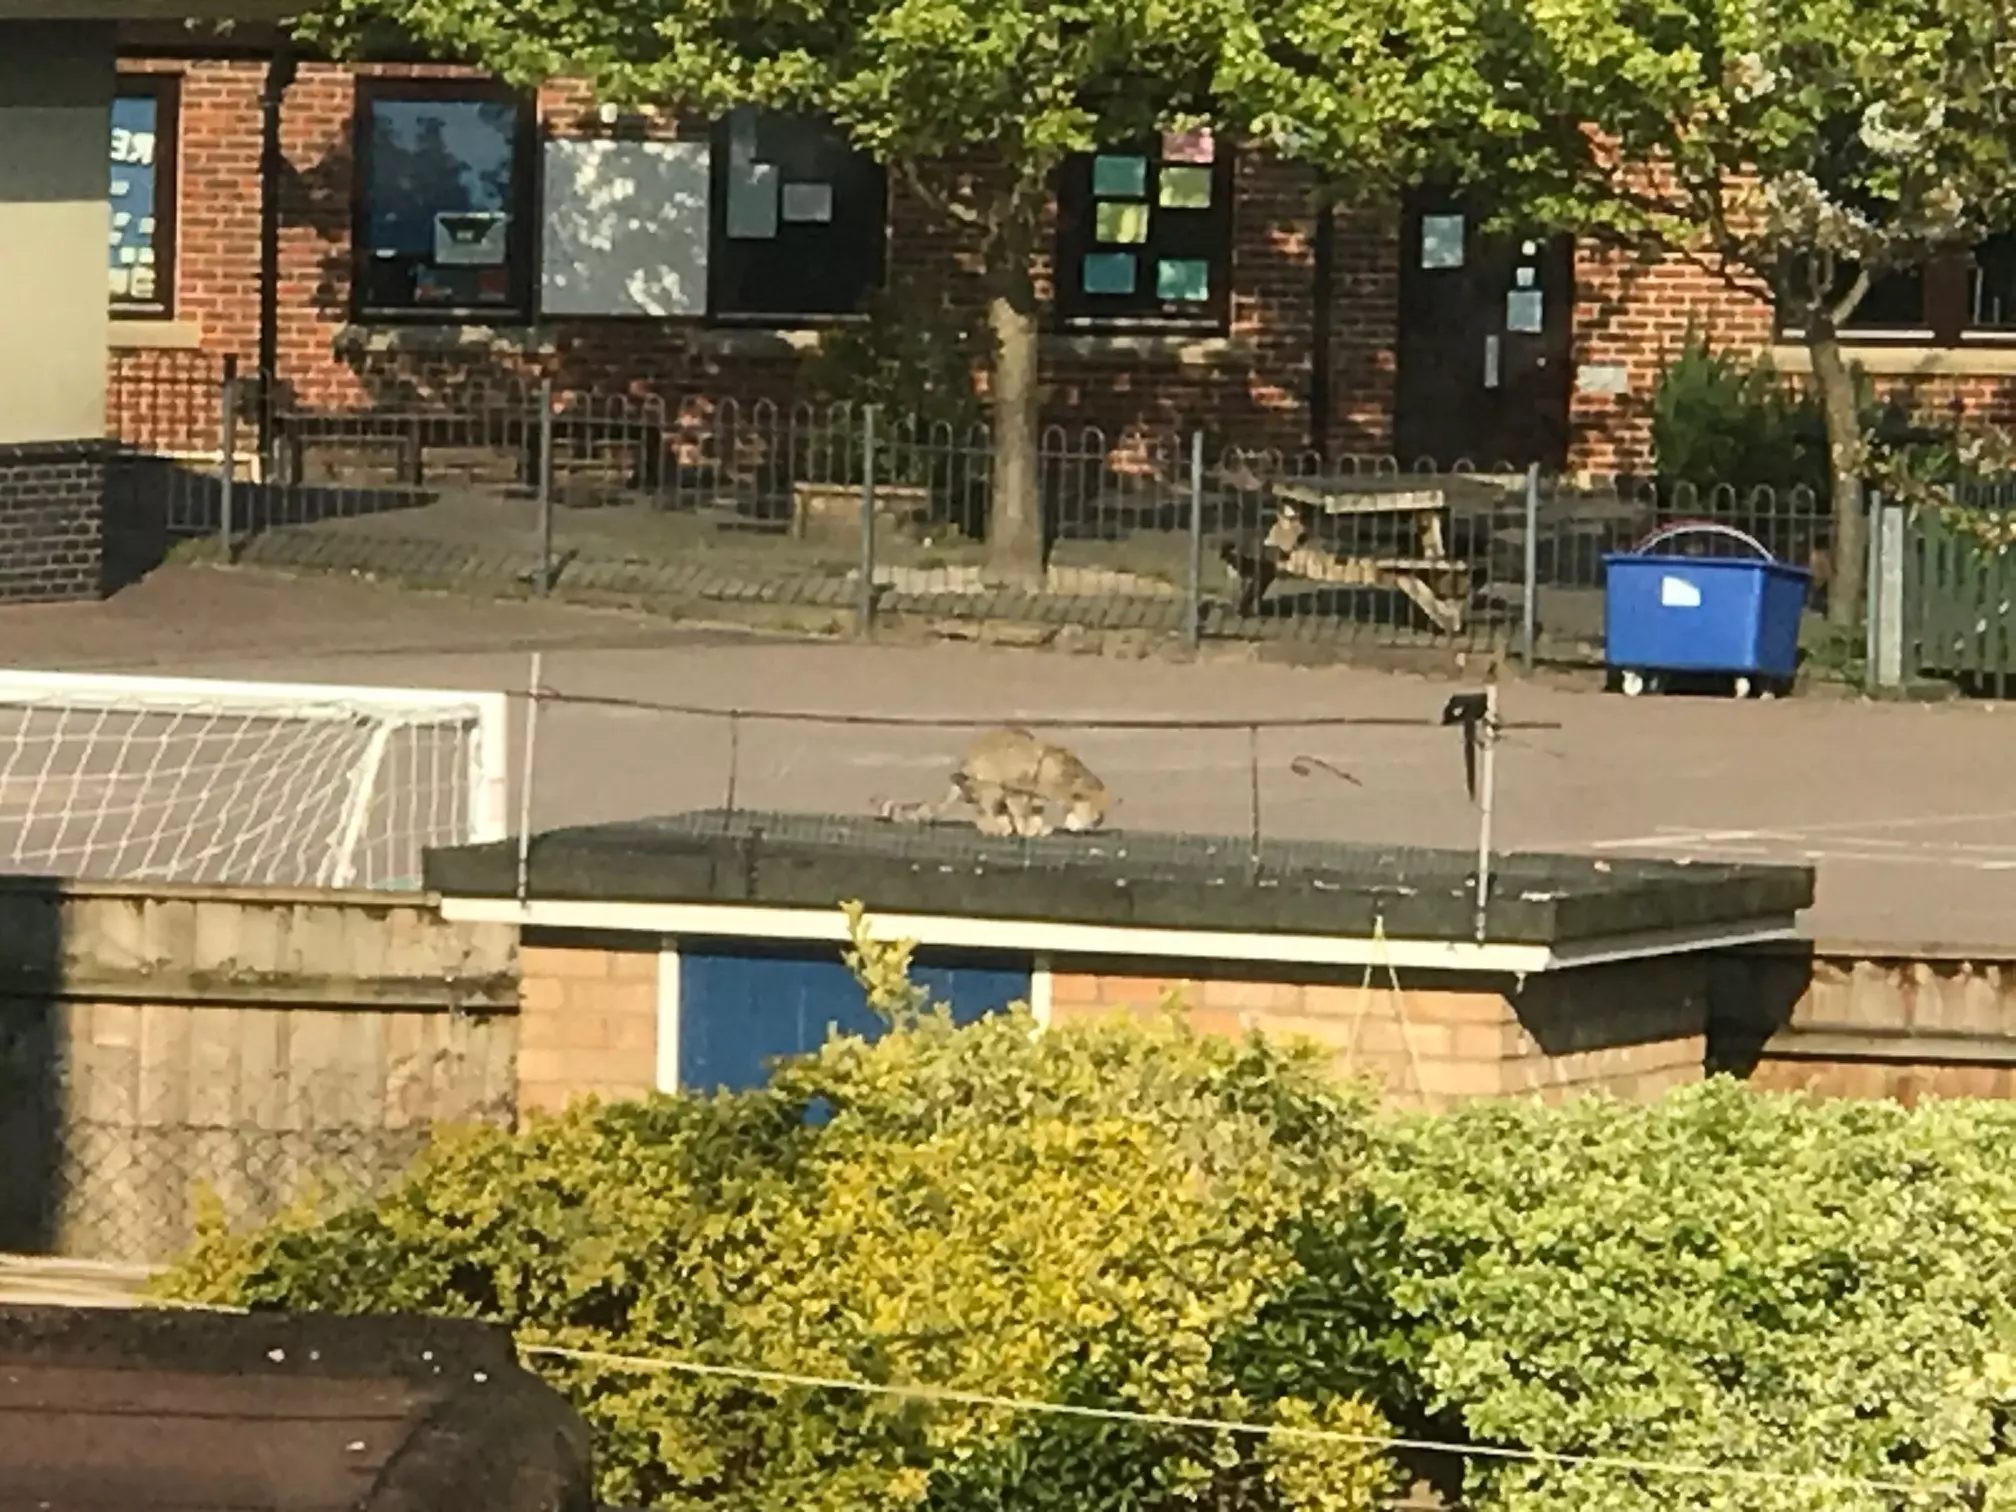 The wildcat was spotted by a resident who lives in the area.